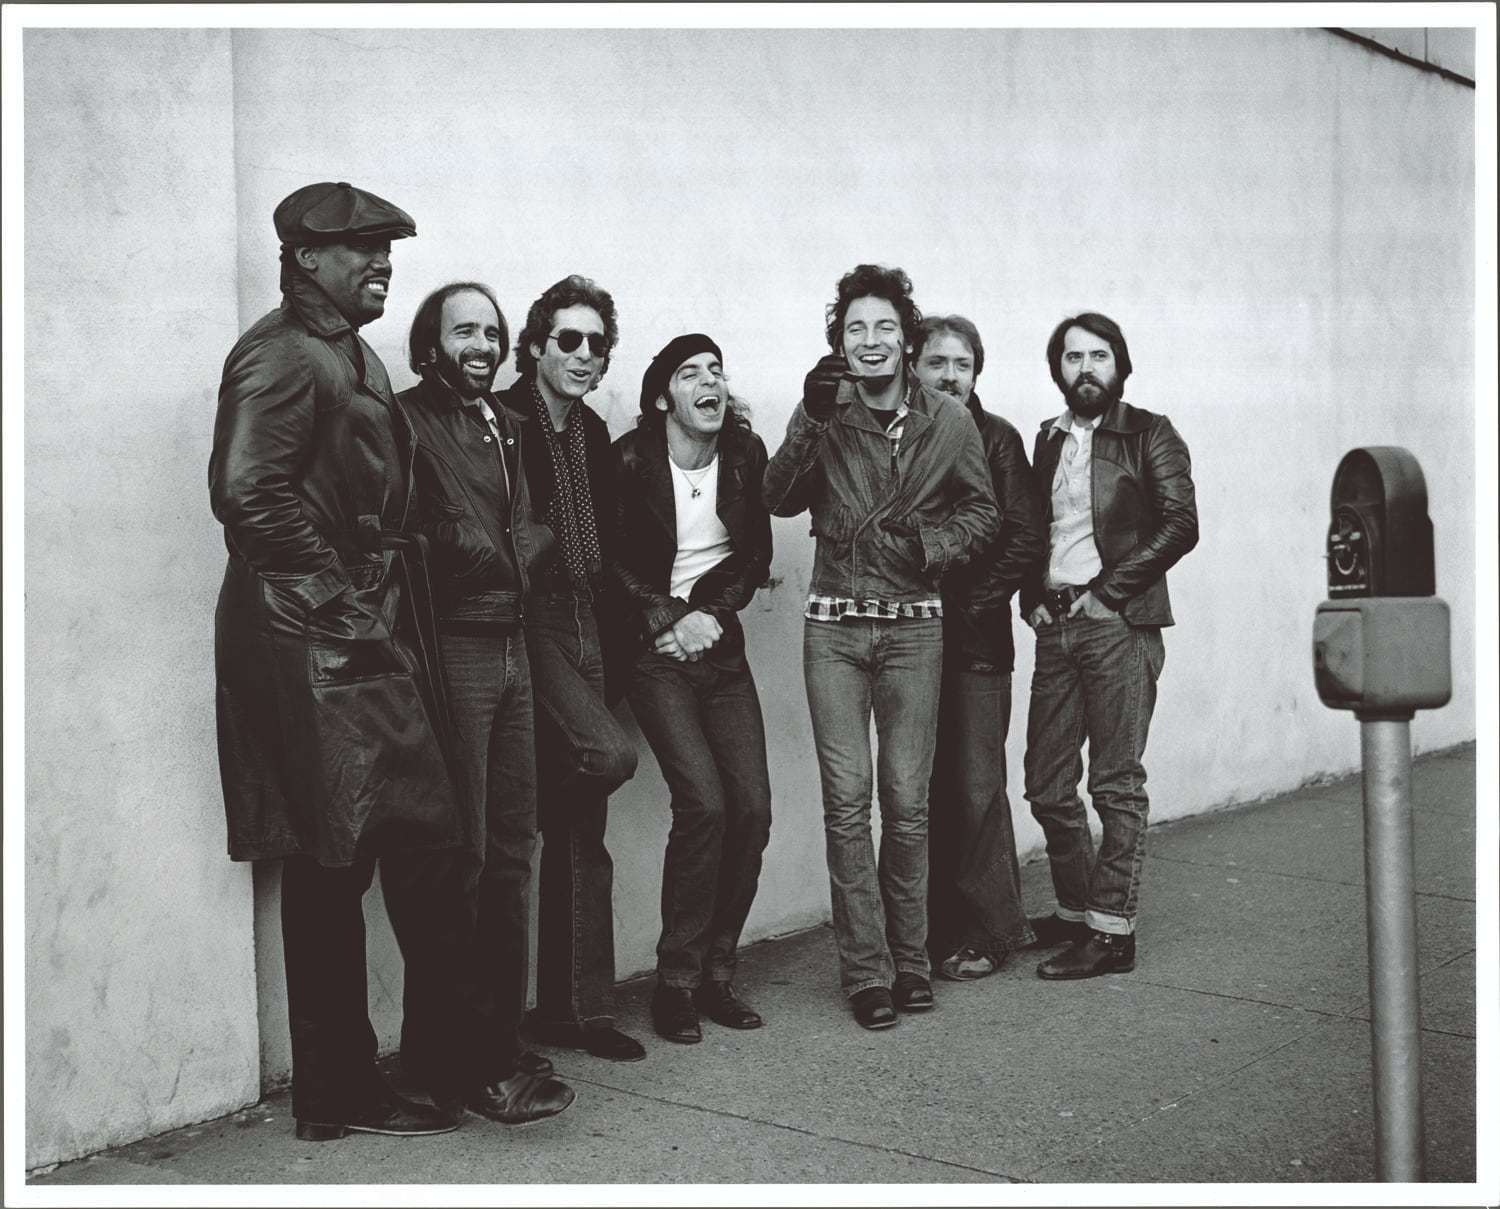 Bruce Springsteen and E Street Band 1978 photo by Frank Stefanko